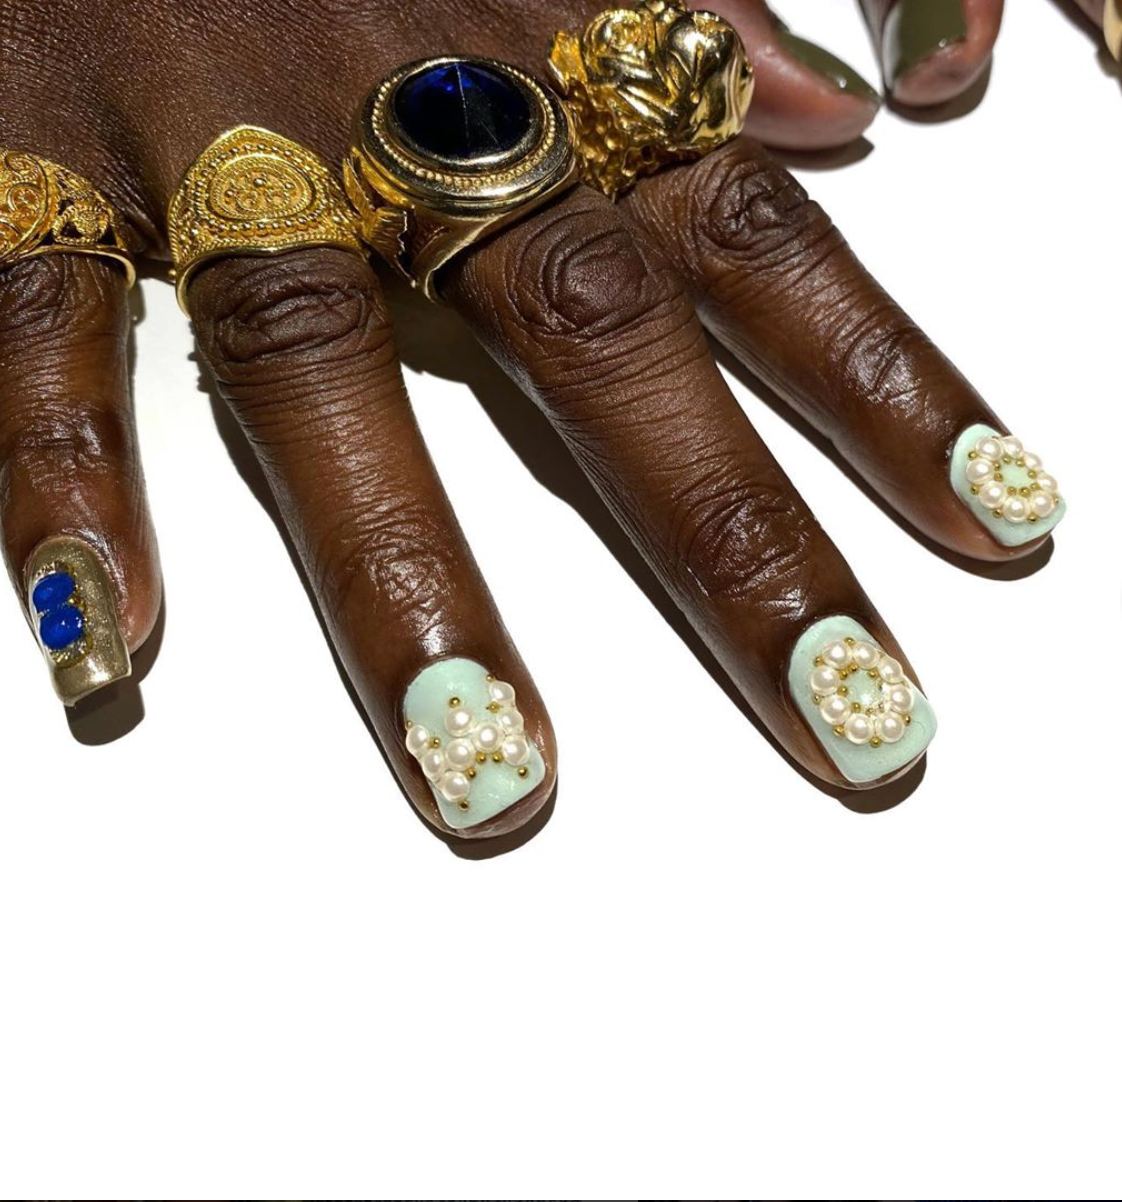 Check Out Trinidad James’ Lavish Nail Art And More Celebrity Men With Must-See Manicures